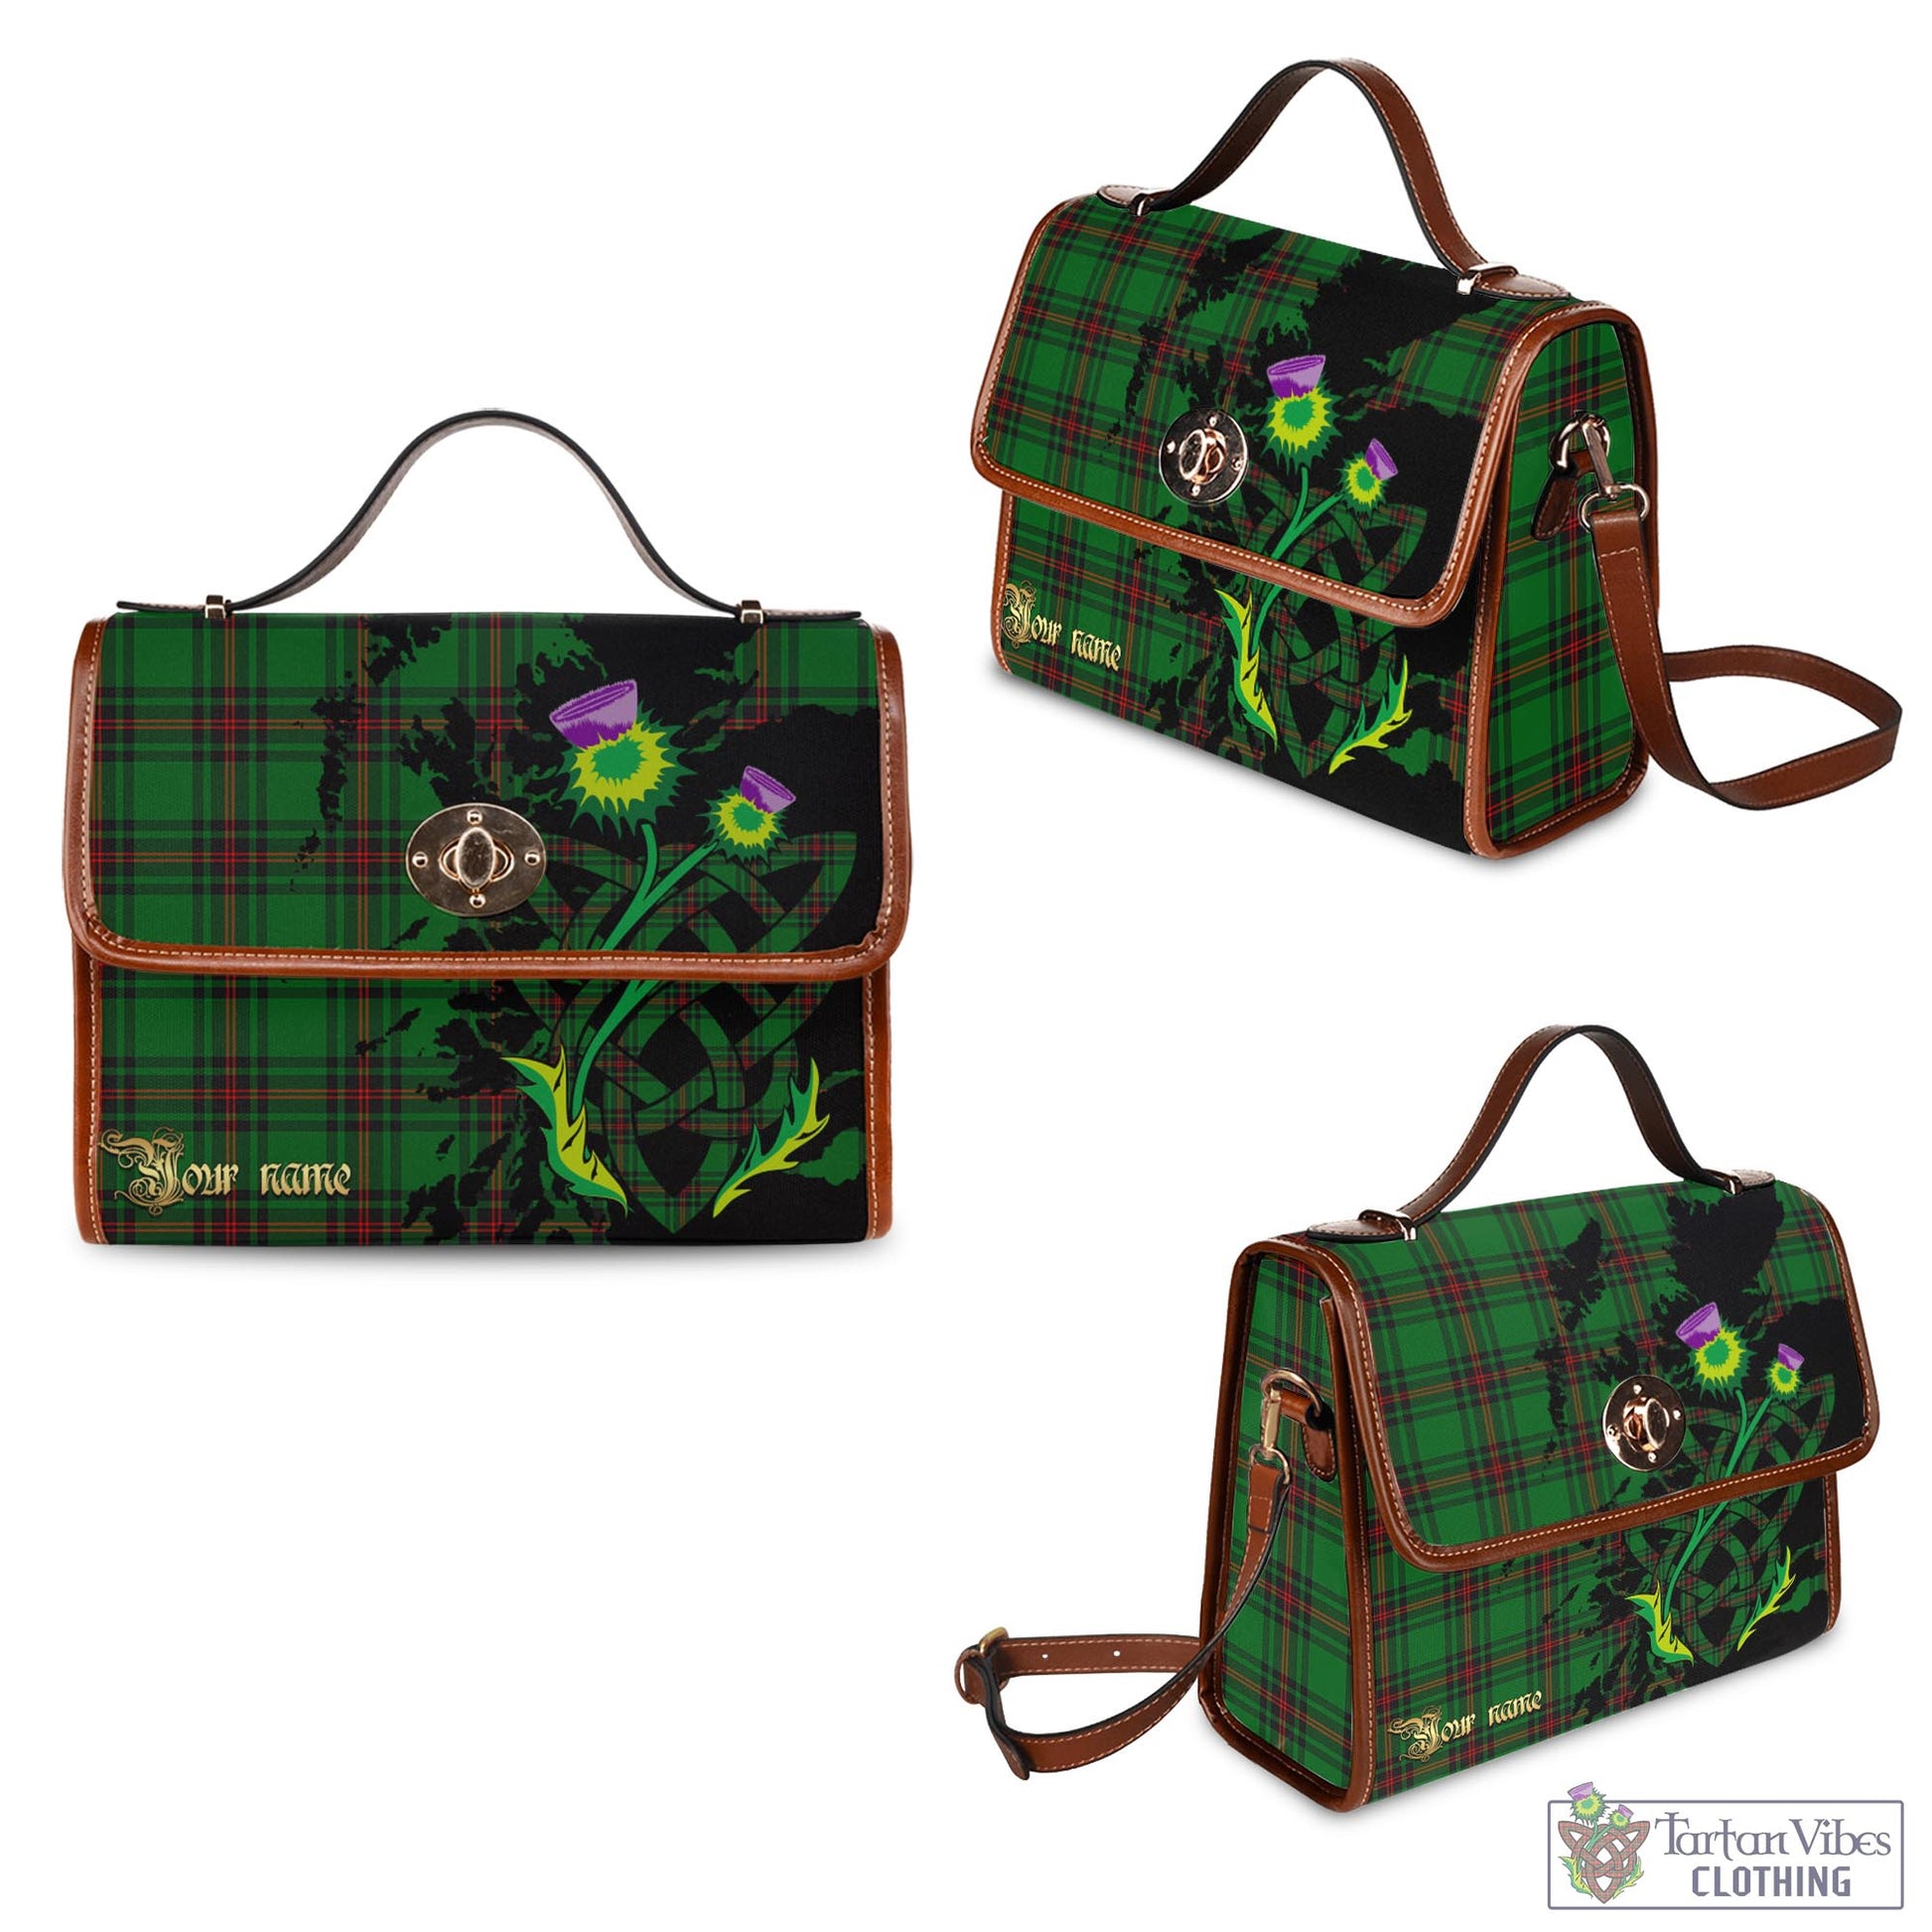 Tartan Vibes Clothing Primrose Tartan Waterproof Canvas Bag with Scotland Map and Thistle Celtic Accents